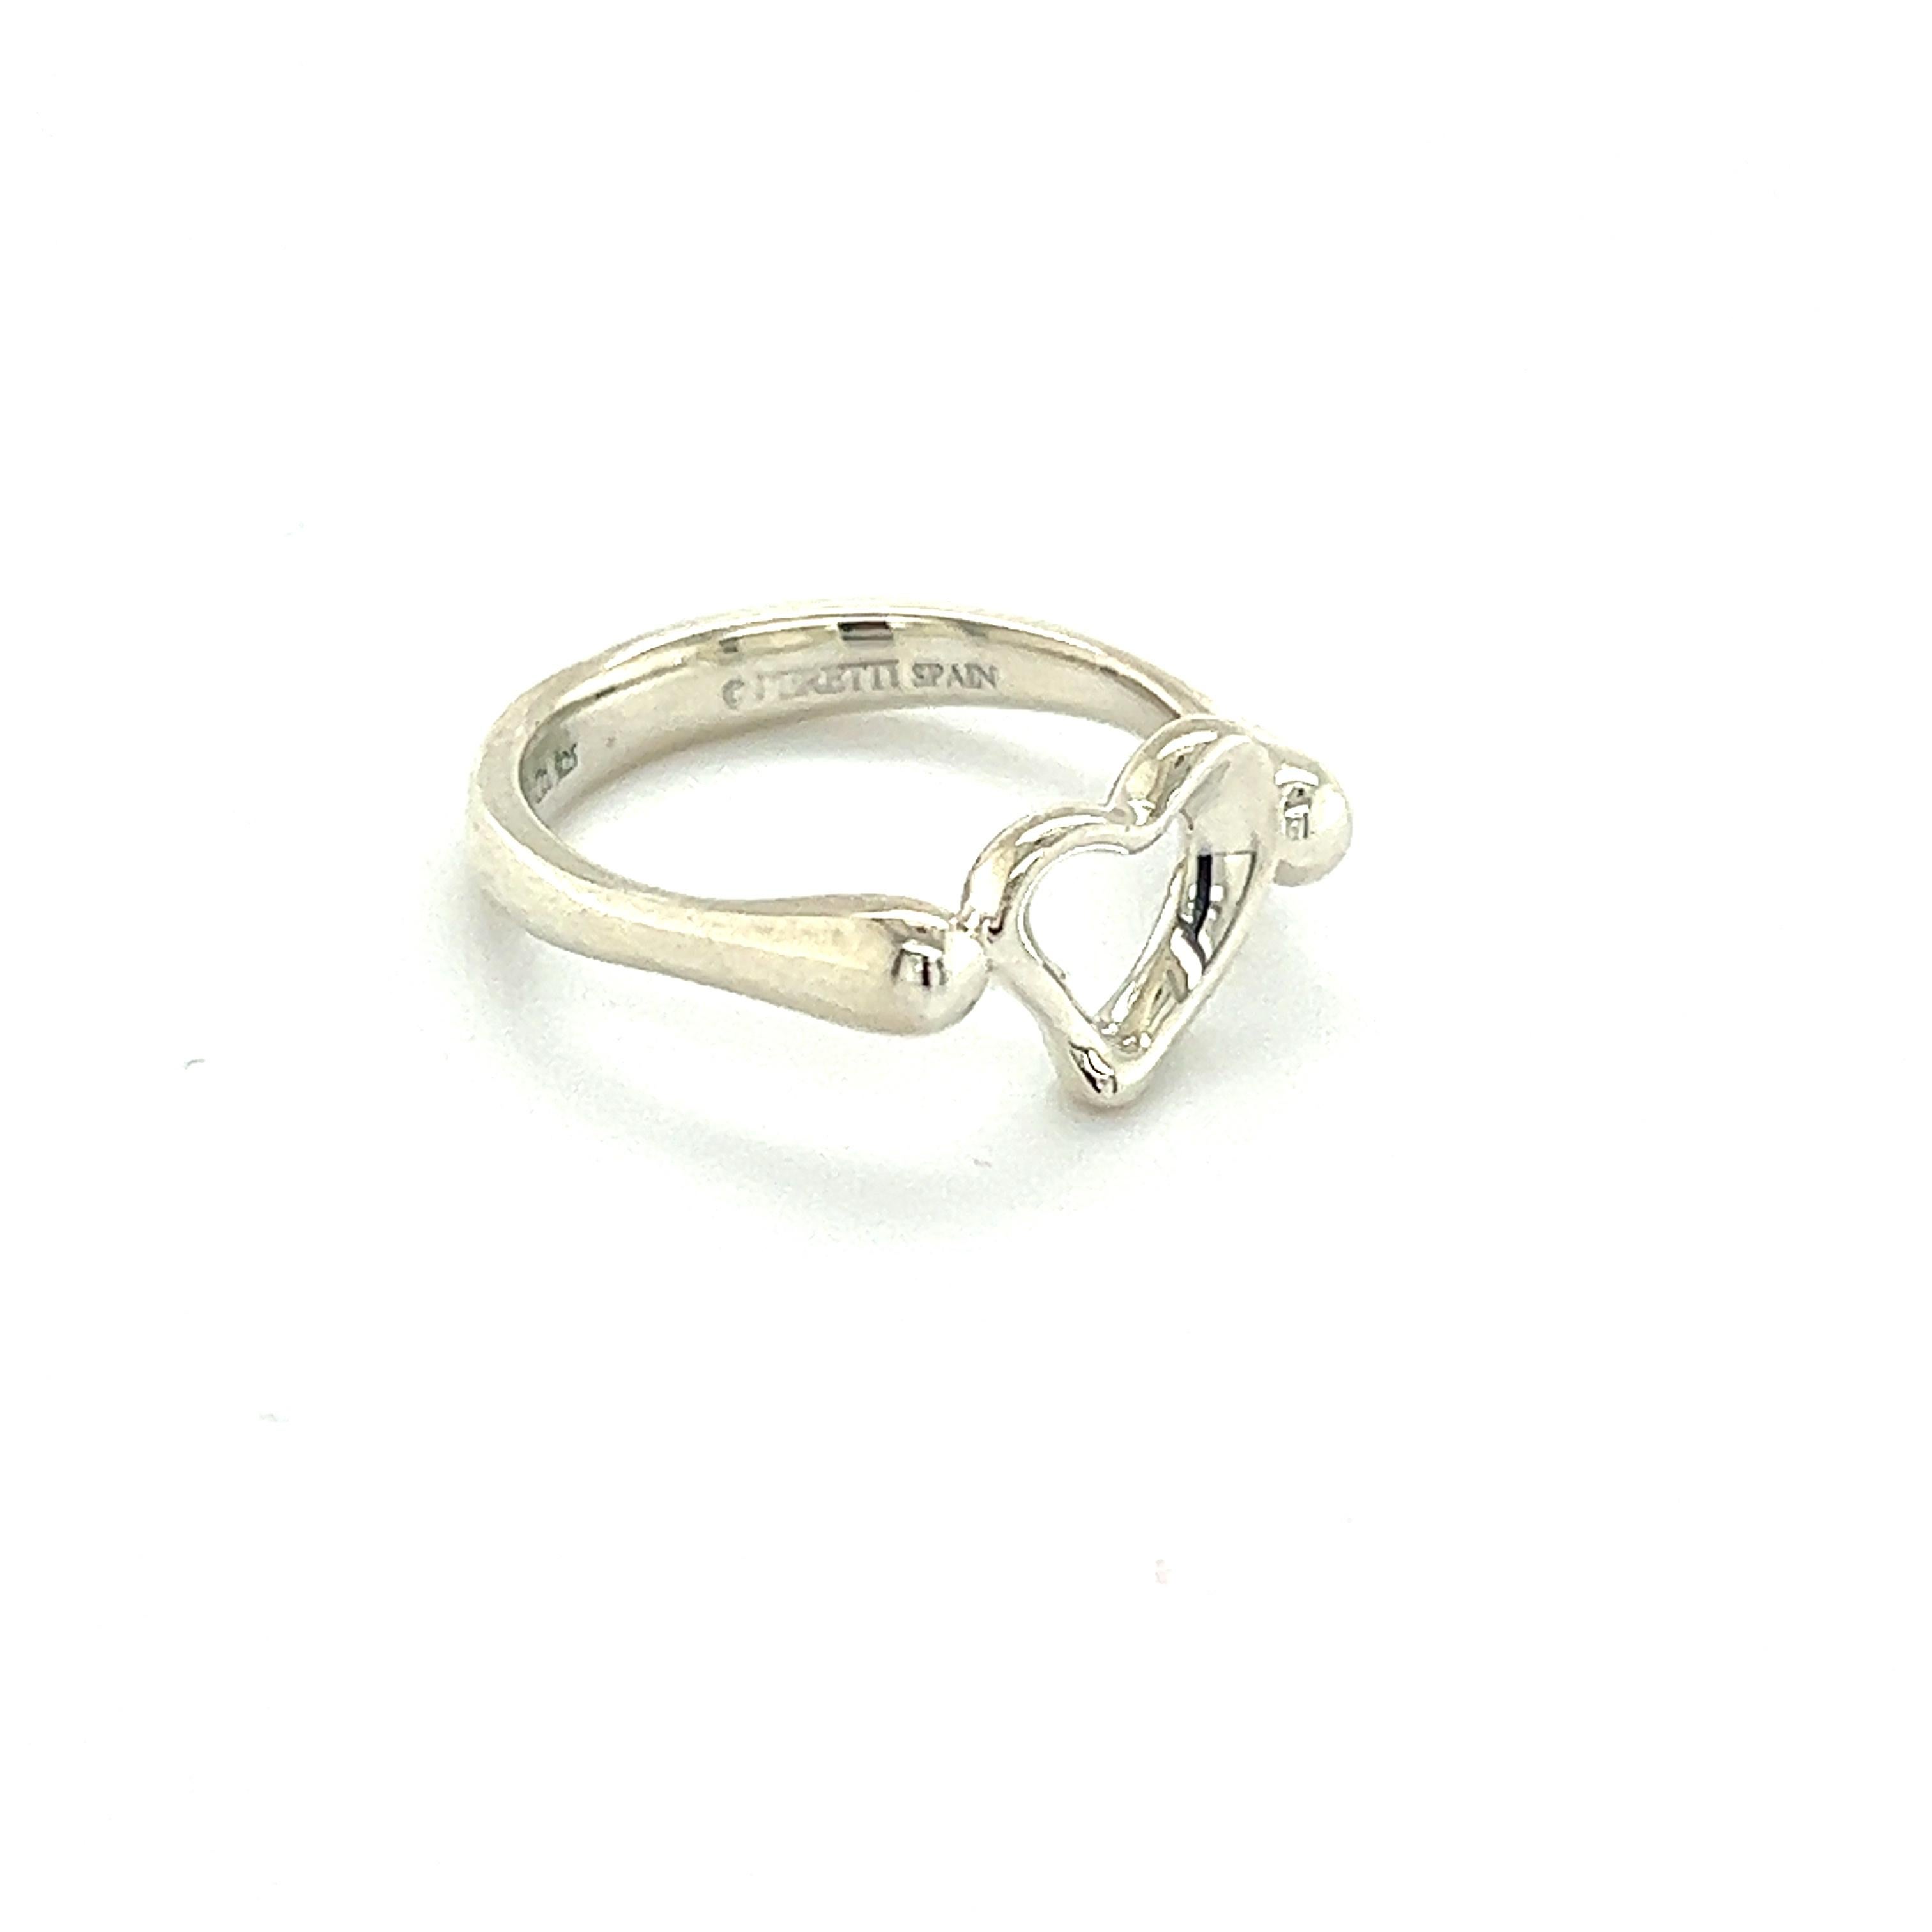 Authentic Tiffany & Co Estate Heart Ring Size 5.25 Silver By Elsa Peretti TIF400

This elegant Authentic Tiffany & Co ring is made of sterling silver and has a weight of 3.3 grams.

TRUSTED SELLER SINCE 2002

PLEASE SEE OUR HUNDREDS OF POSITIVE